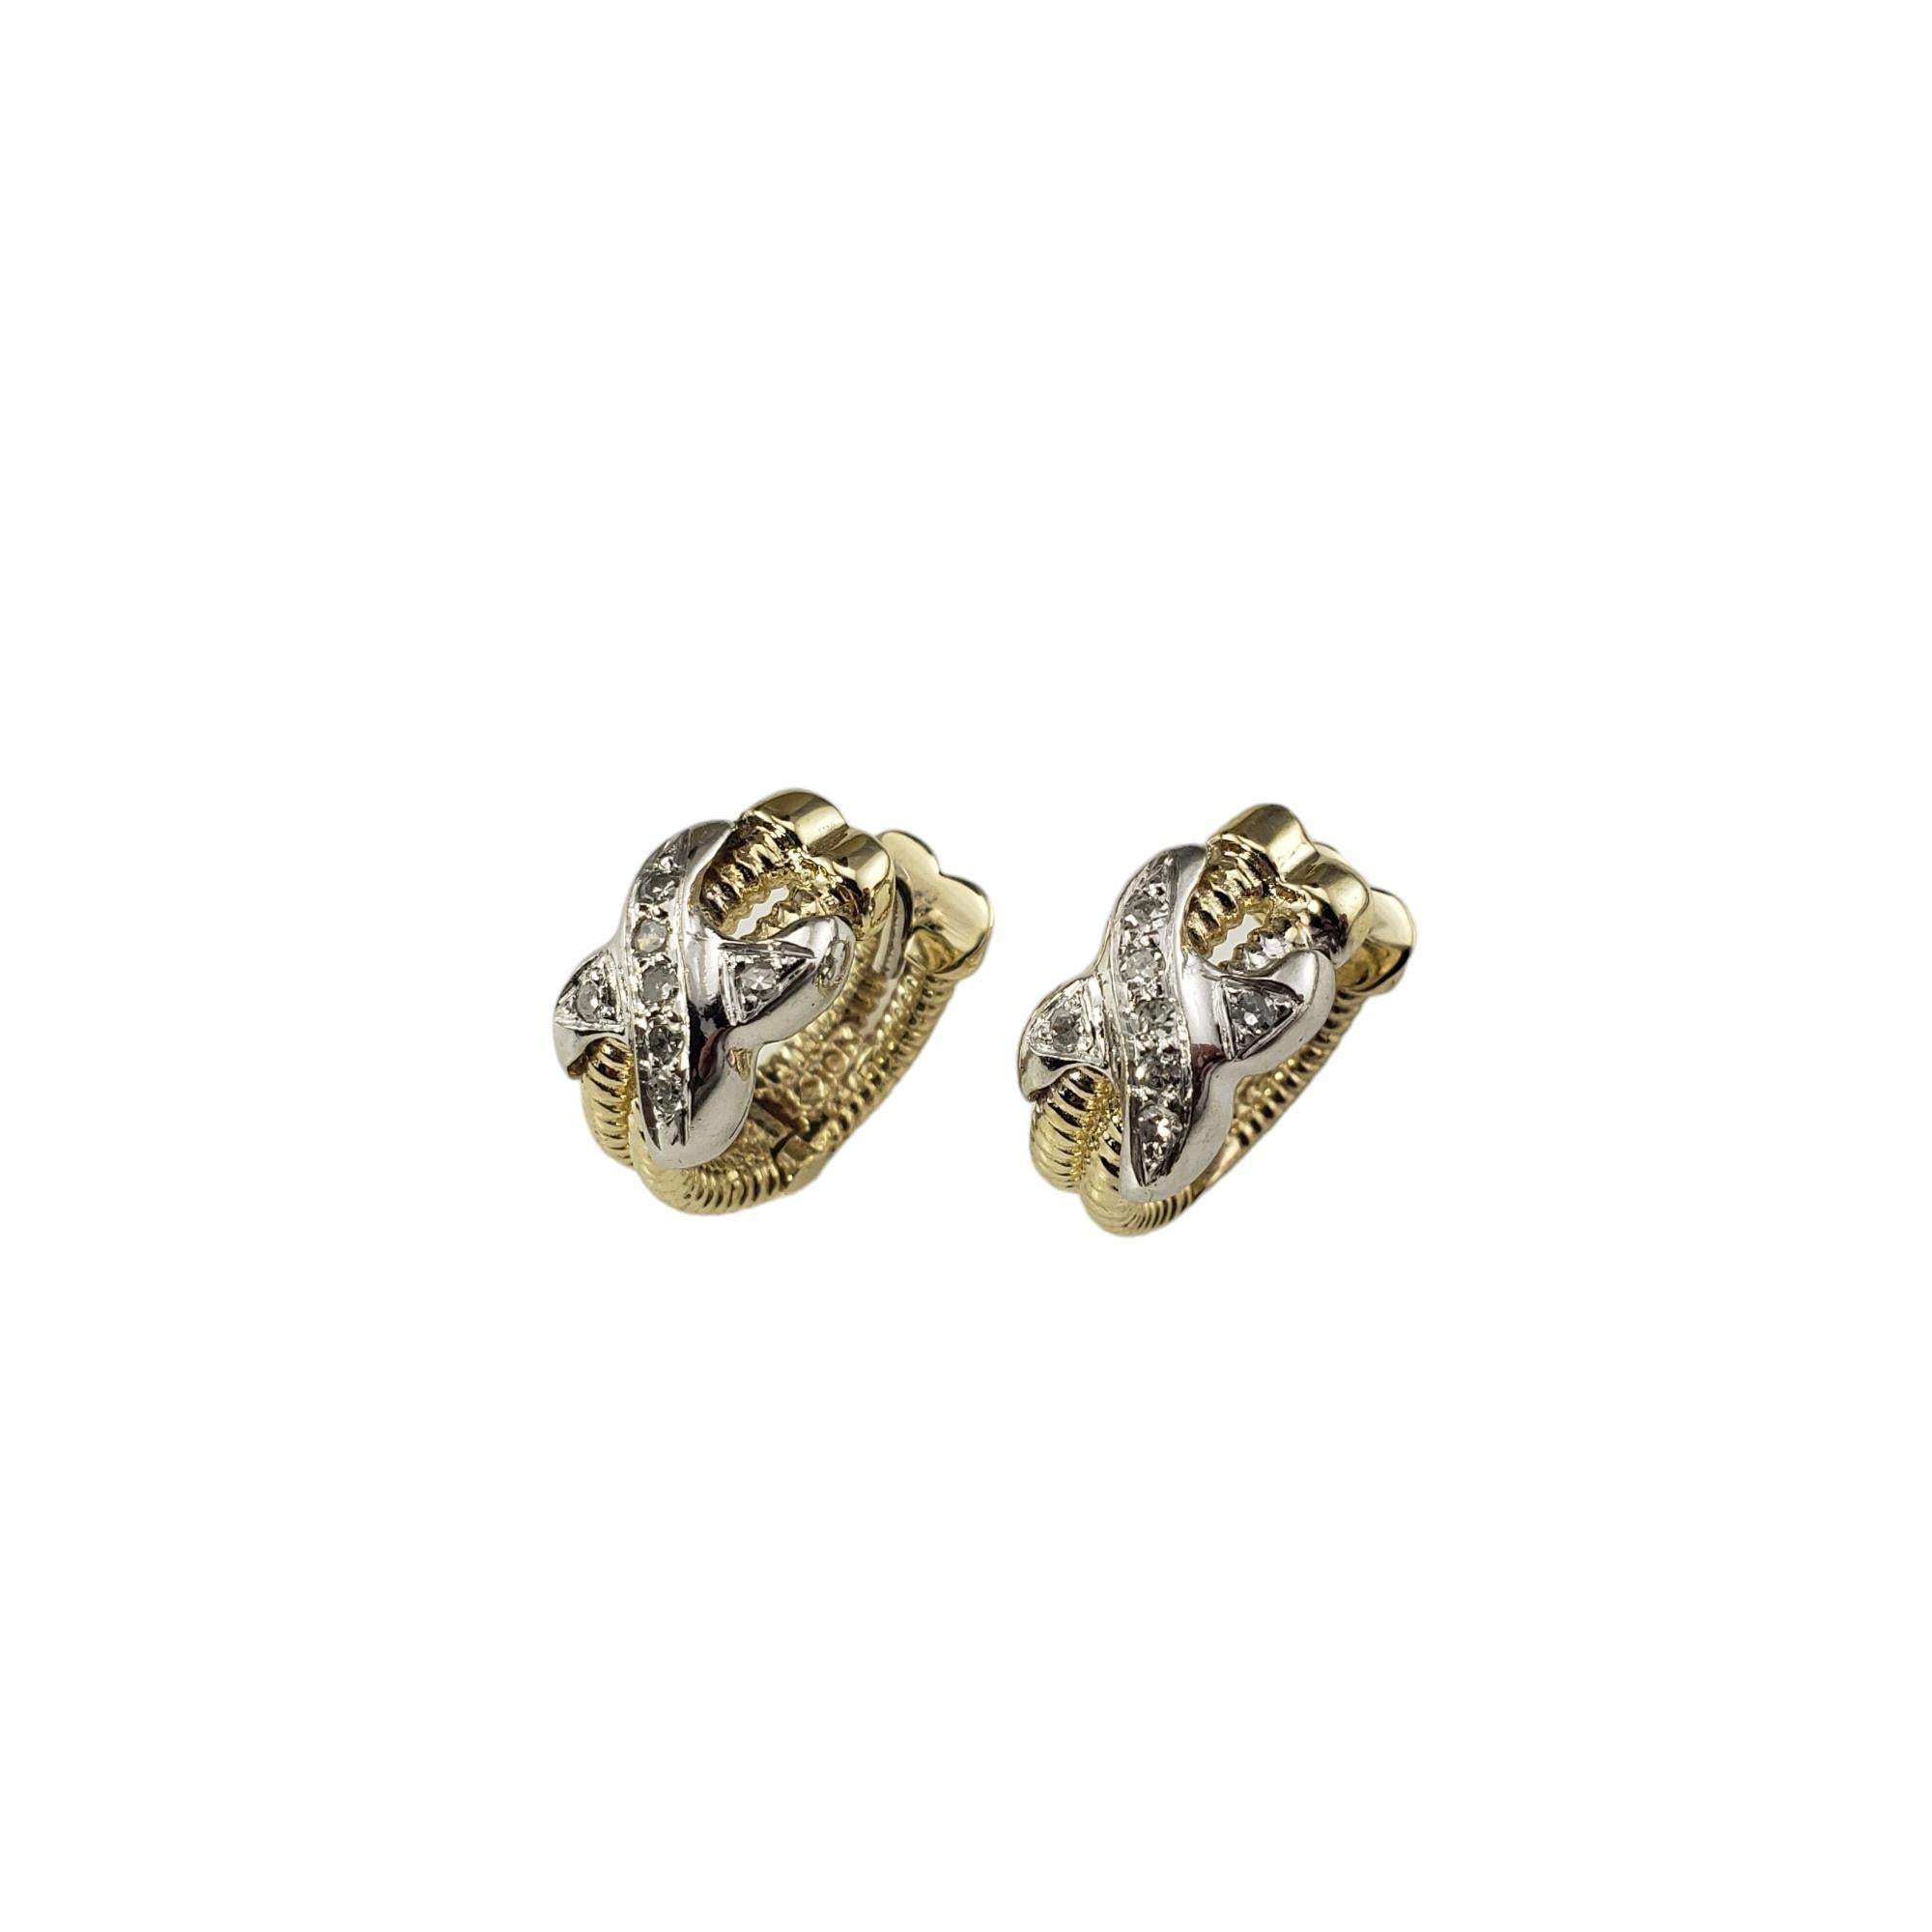 10K Yellow Gold White Gold and Diamond Hoop X Earrings

These lovely earrings each feature seven round single cut diamonds set in beautifully detailed 10K yellow and white gold.

 Width: 7 mm.

Approximate total diamond weight: .10 ct.

Diamond